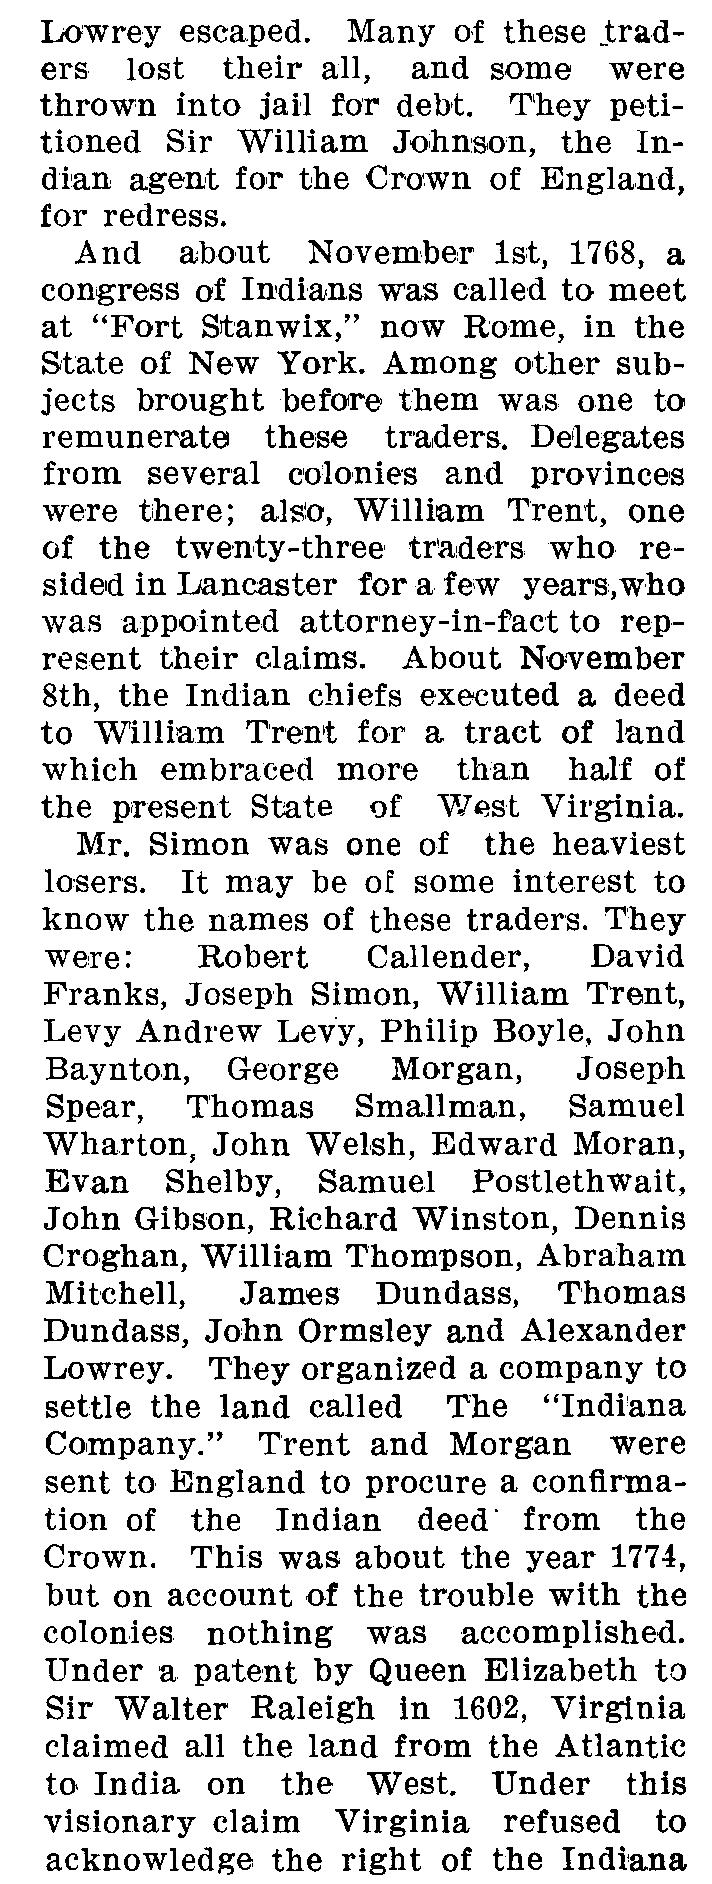 Lowrey escaped. Many of these traders lost their all, and some were thrown into jail for debt. They petitioned Sir William Johnson, the Indian agent for the Crown of England, for redress.